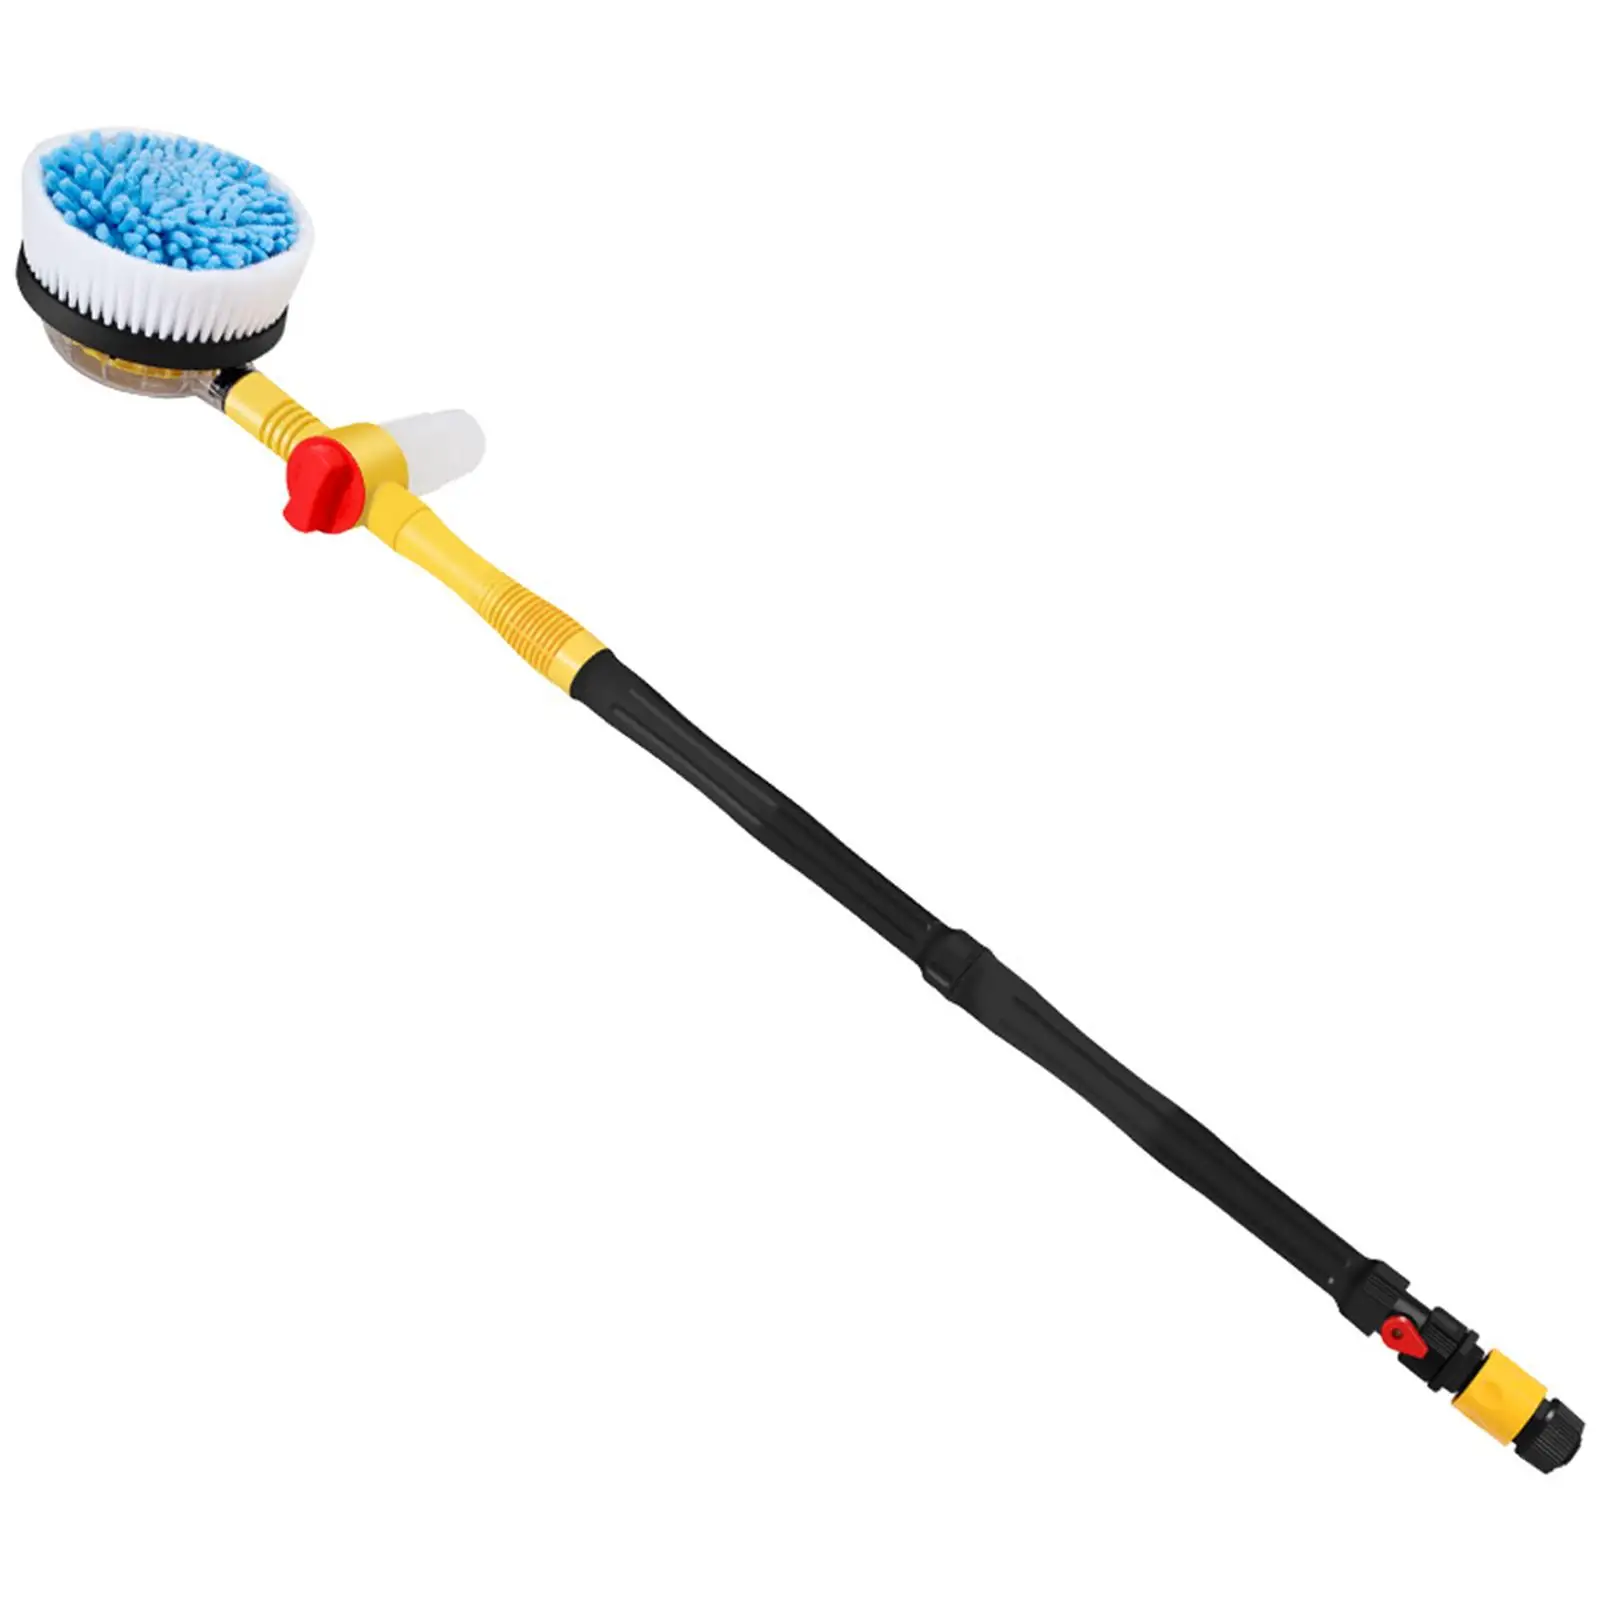 Car Rotary Wash Brush Kit Microfiber  Adjustable 360 Degree High Pressure Washer Scrubber for Automotive Cleaning Glass